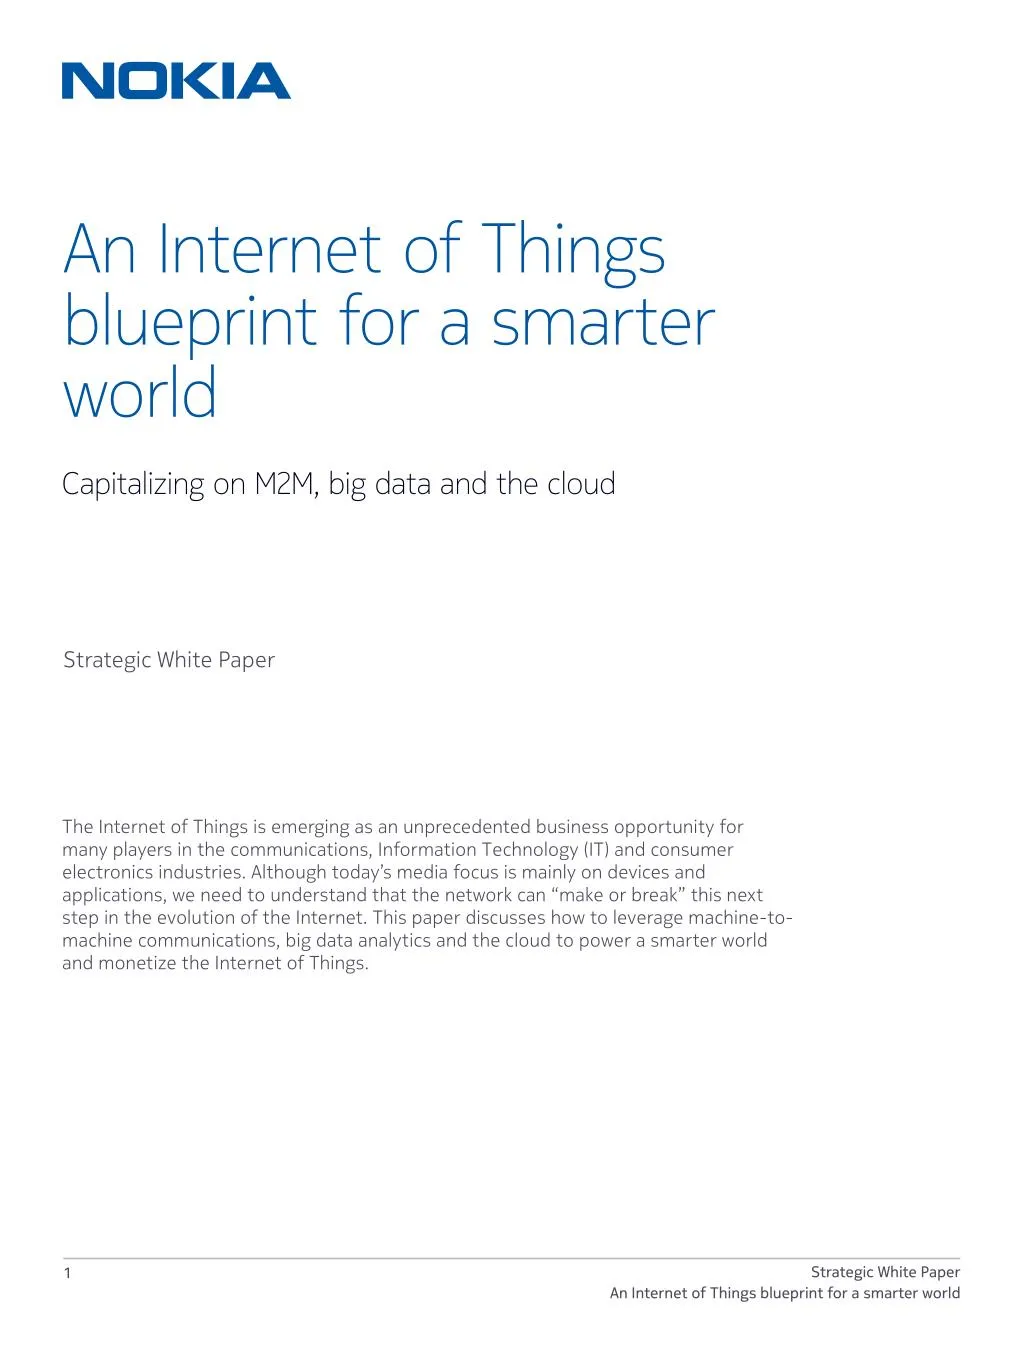 an internet of things blueprint for a smarter